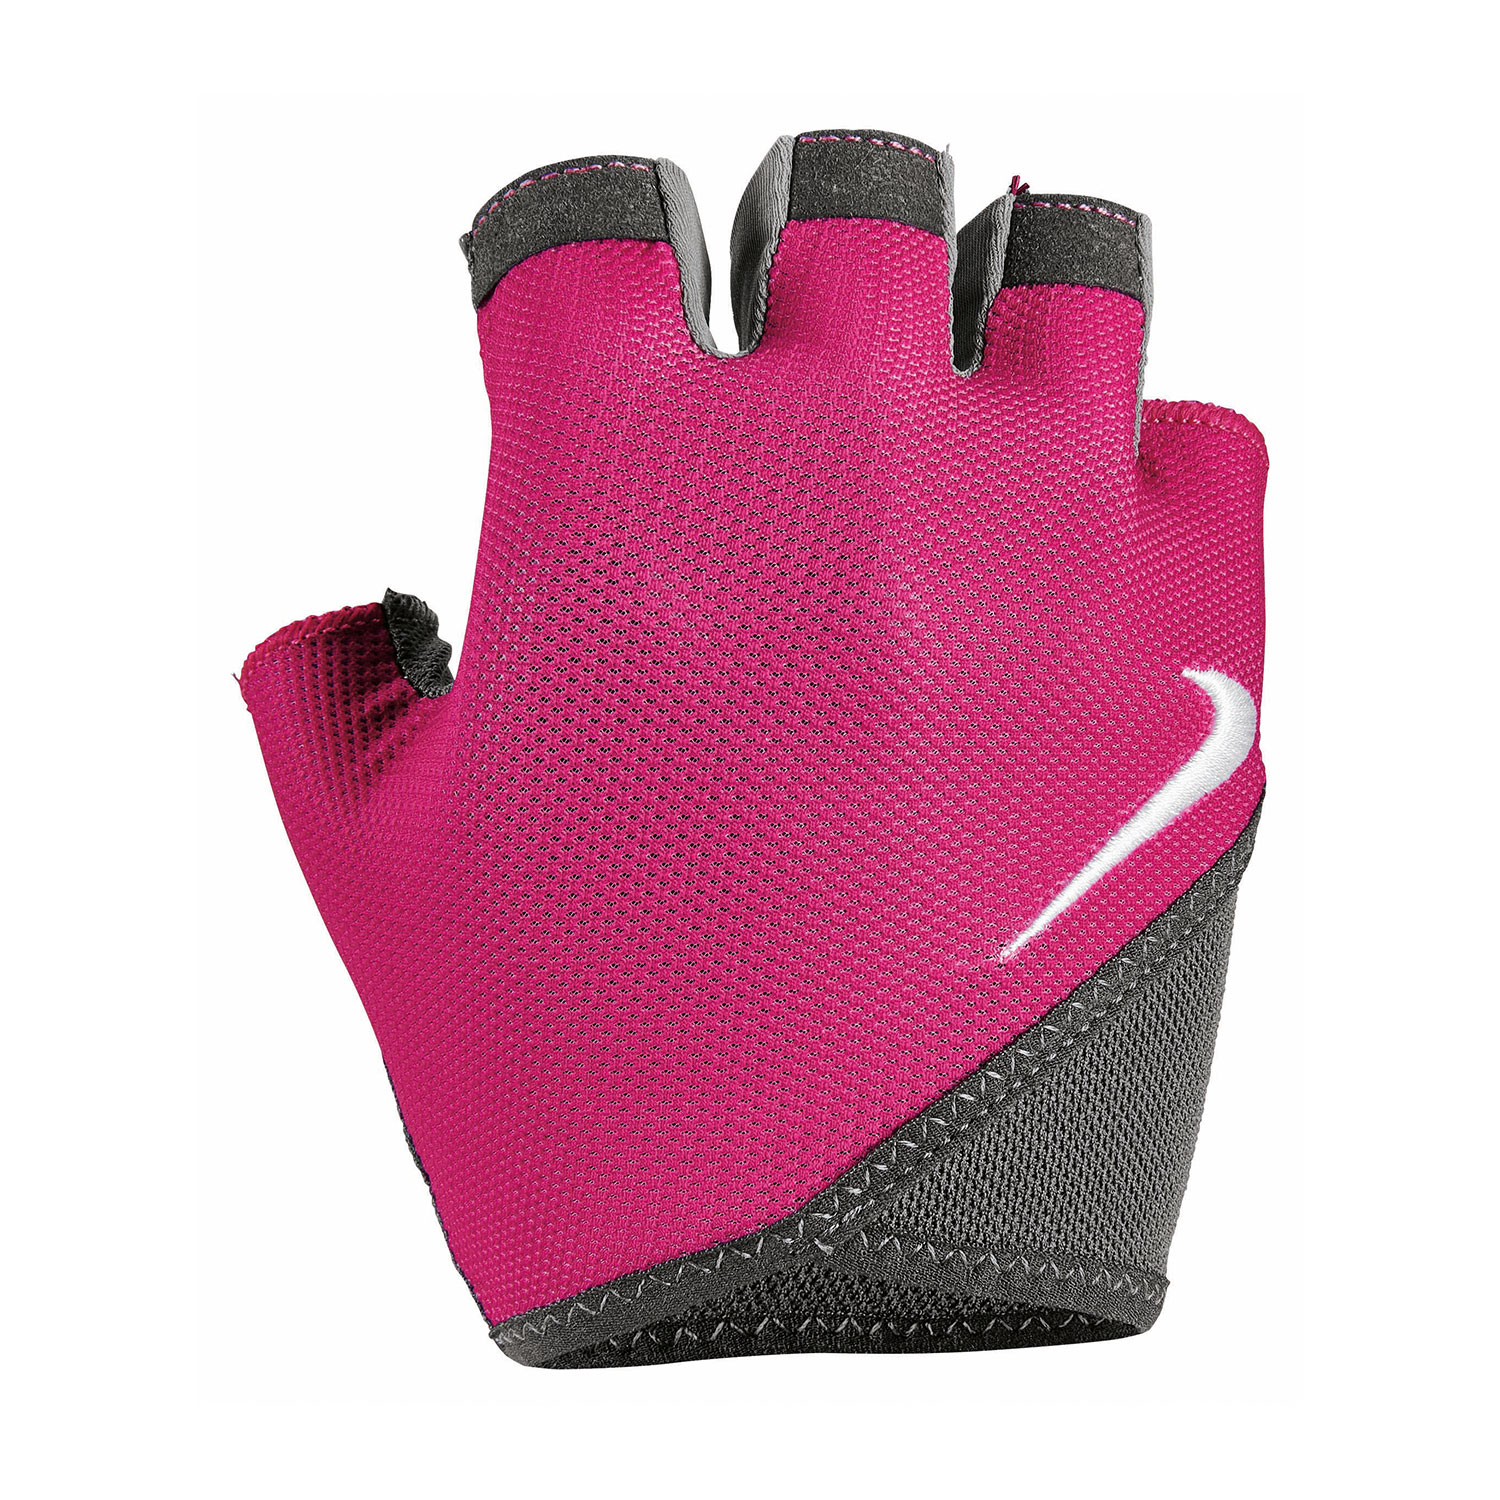 Nike Fitness Guantes Entrenamiento Mujer Pink